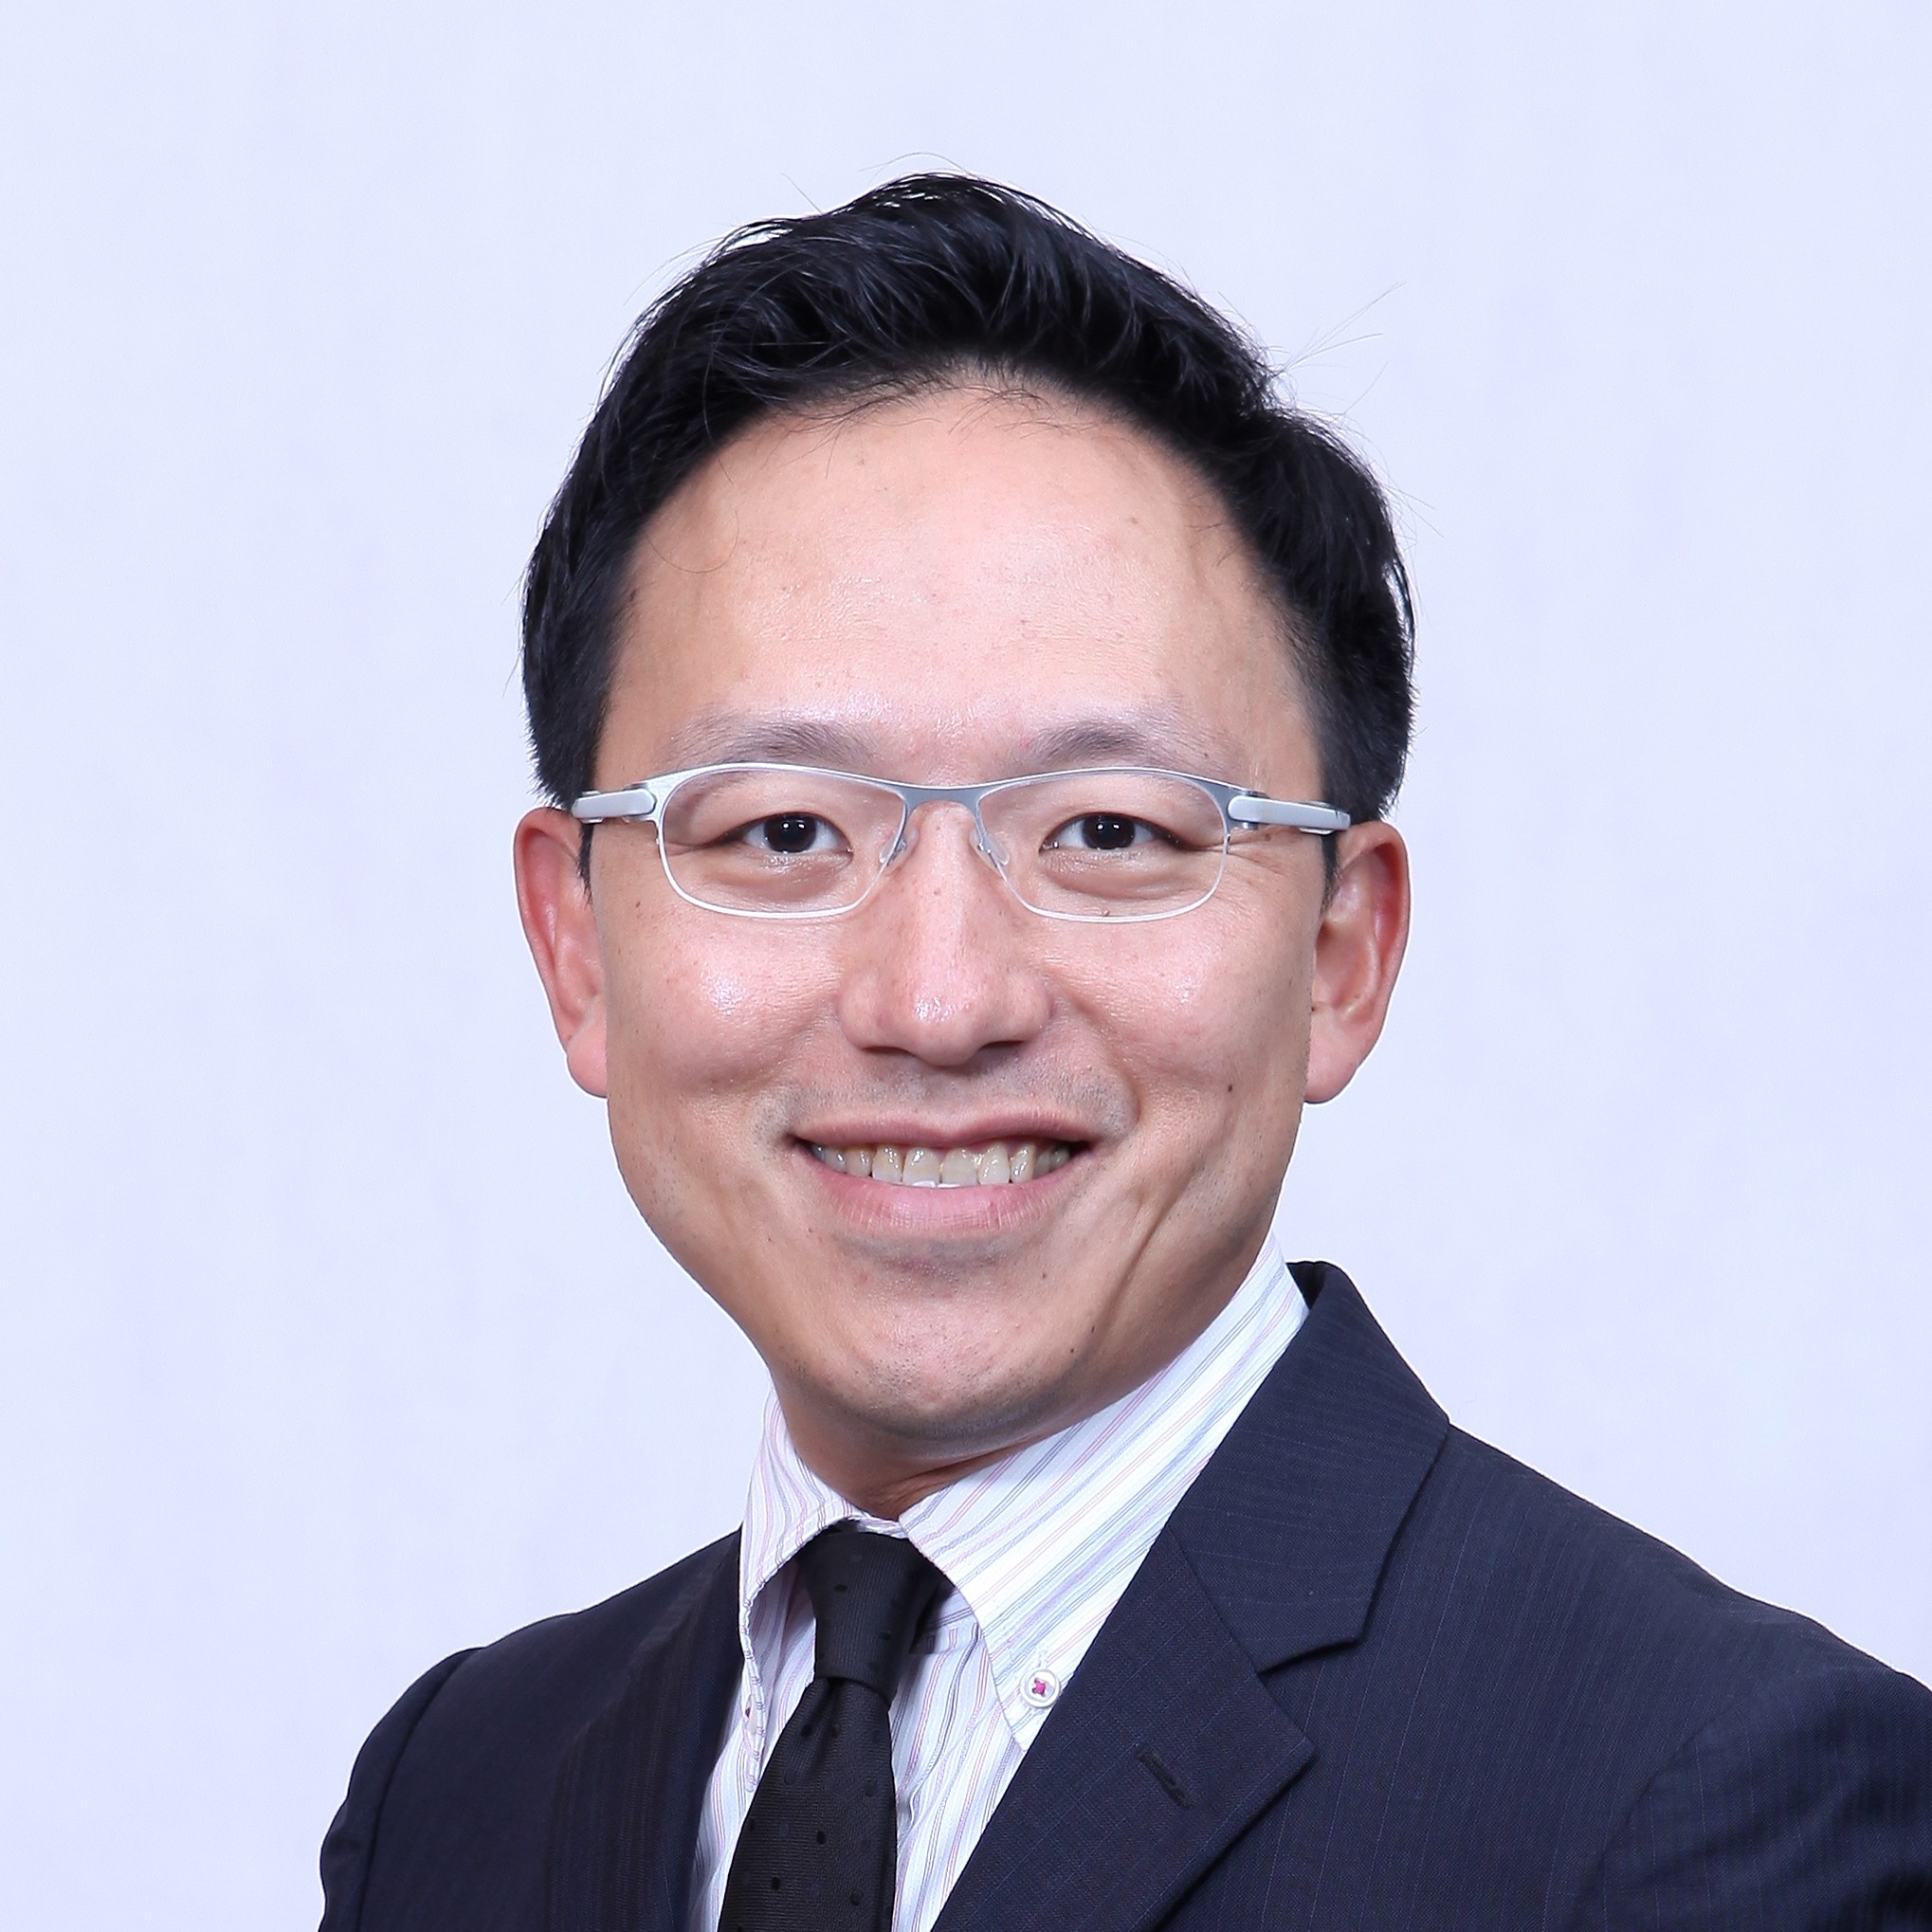 M&A activity is up, thanks to the ‘Belt and Road Initiative’s’ growth, says Raymond Cheng